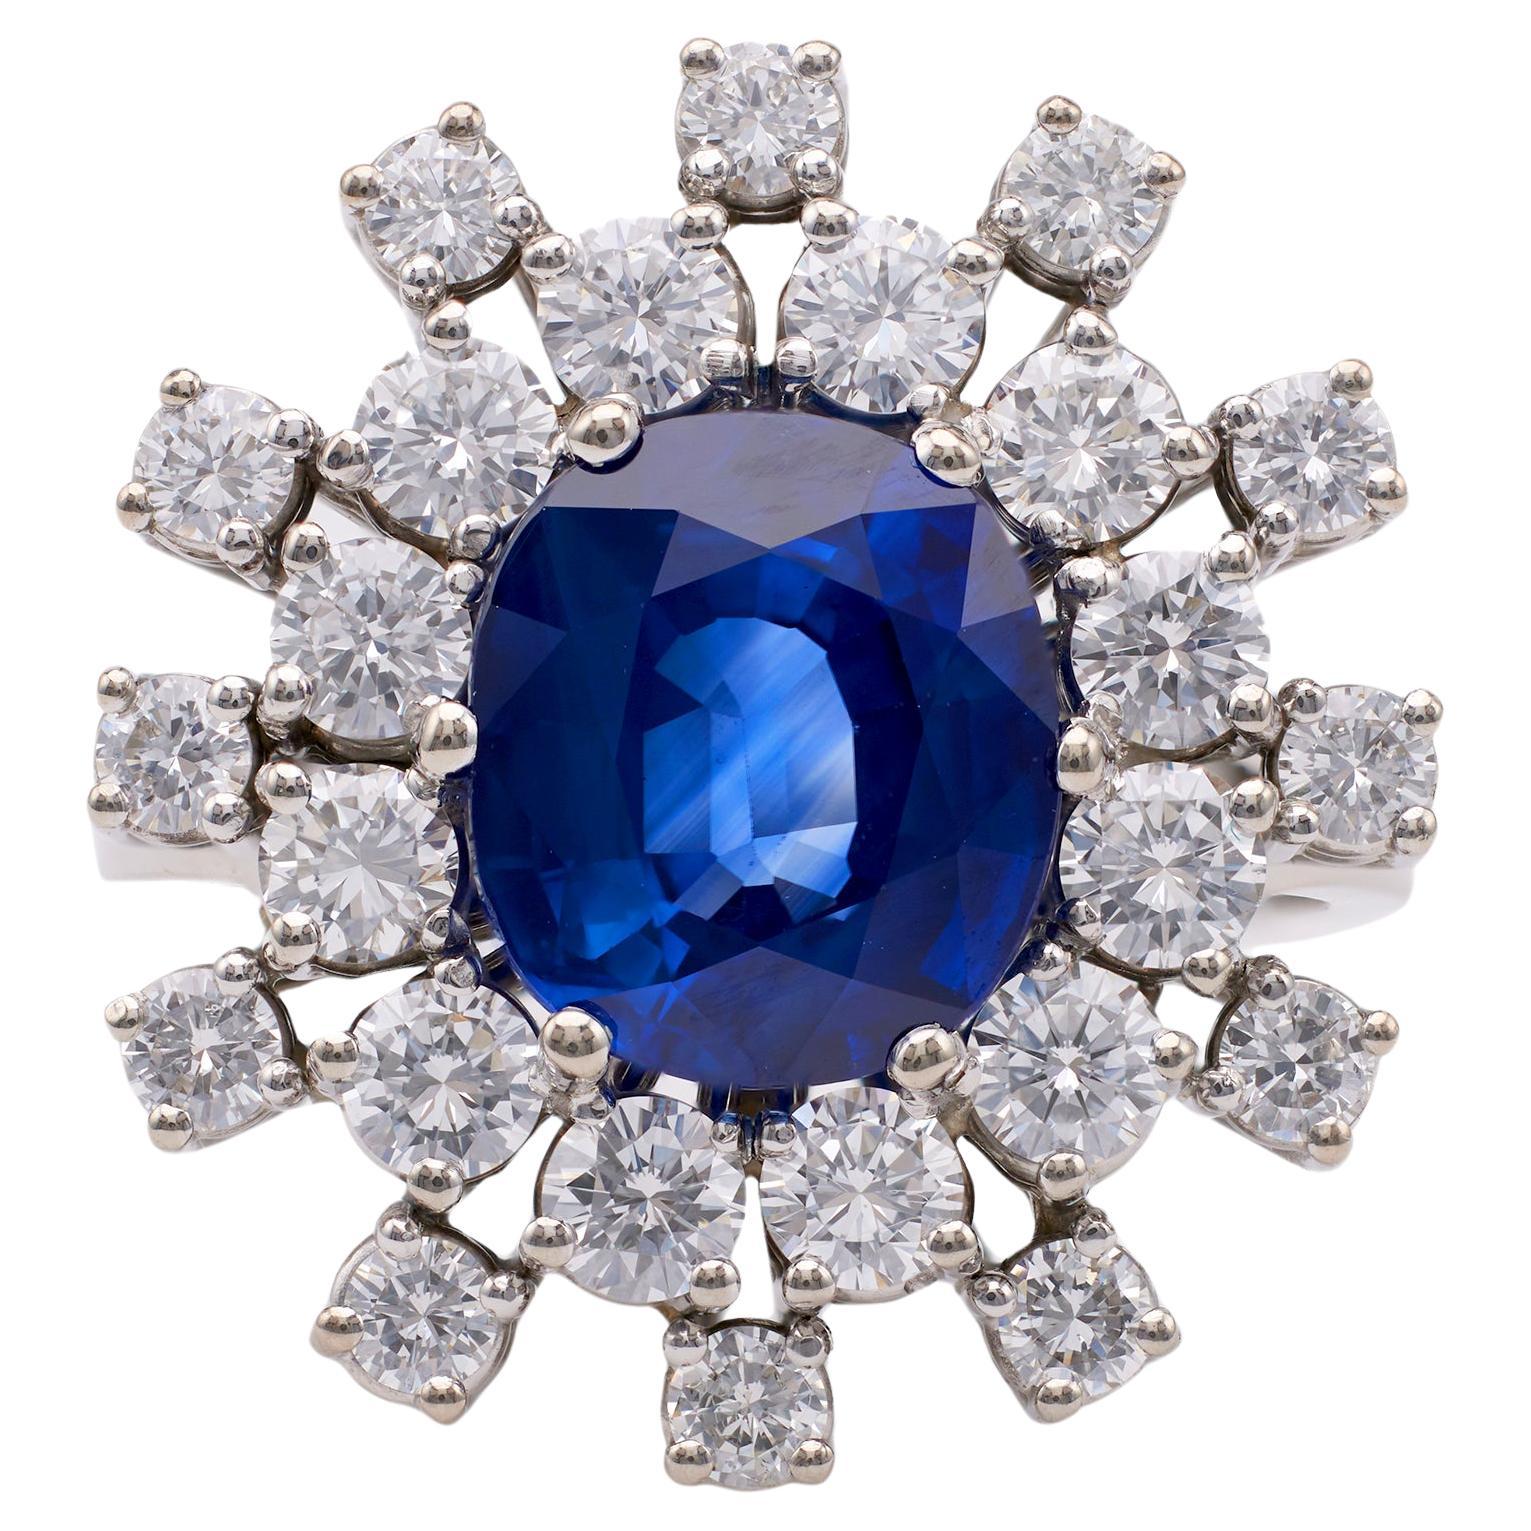 Vintage GIA 4.20 Carat Madagascan Sapphire and Diamond 18k White Gold Ring For Sale